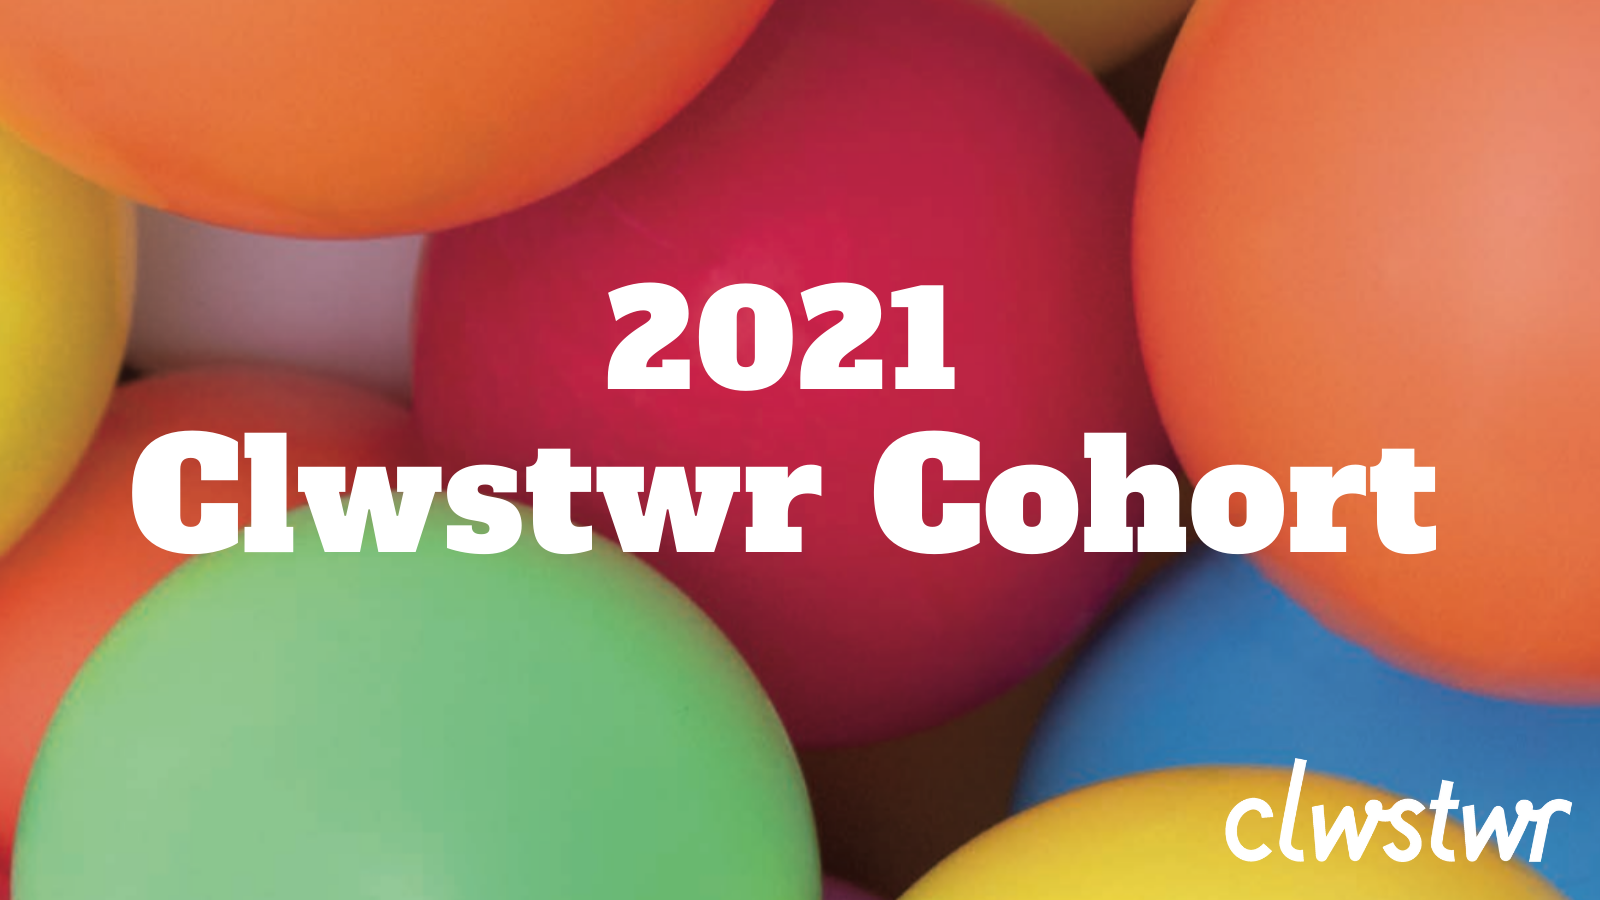 Image reads: 2021 Clwstwr Cohort on a background of balloons